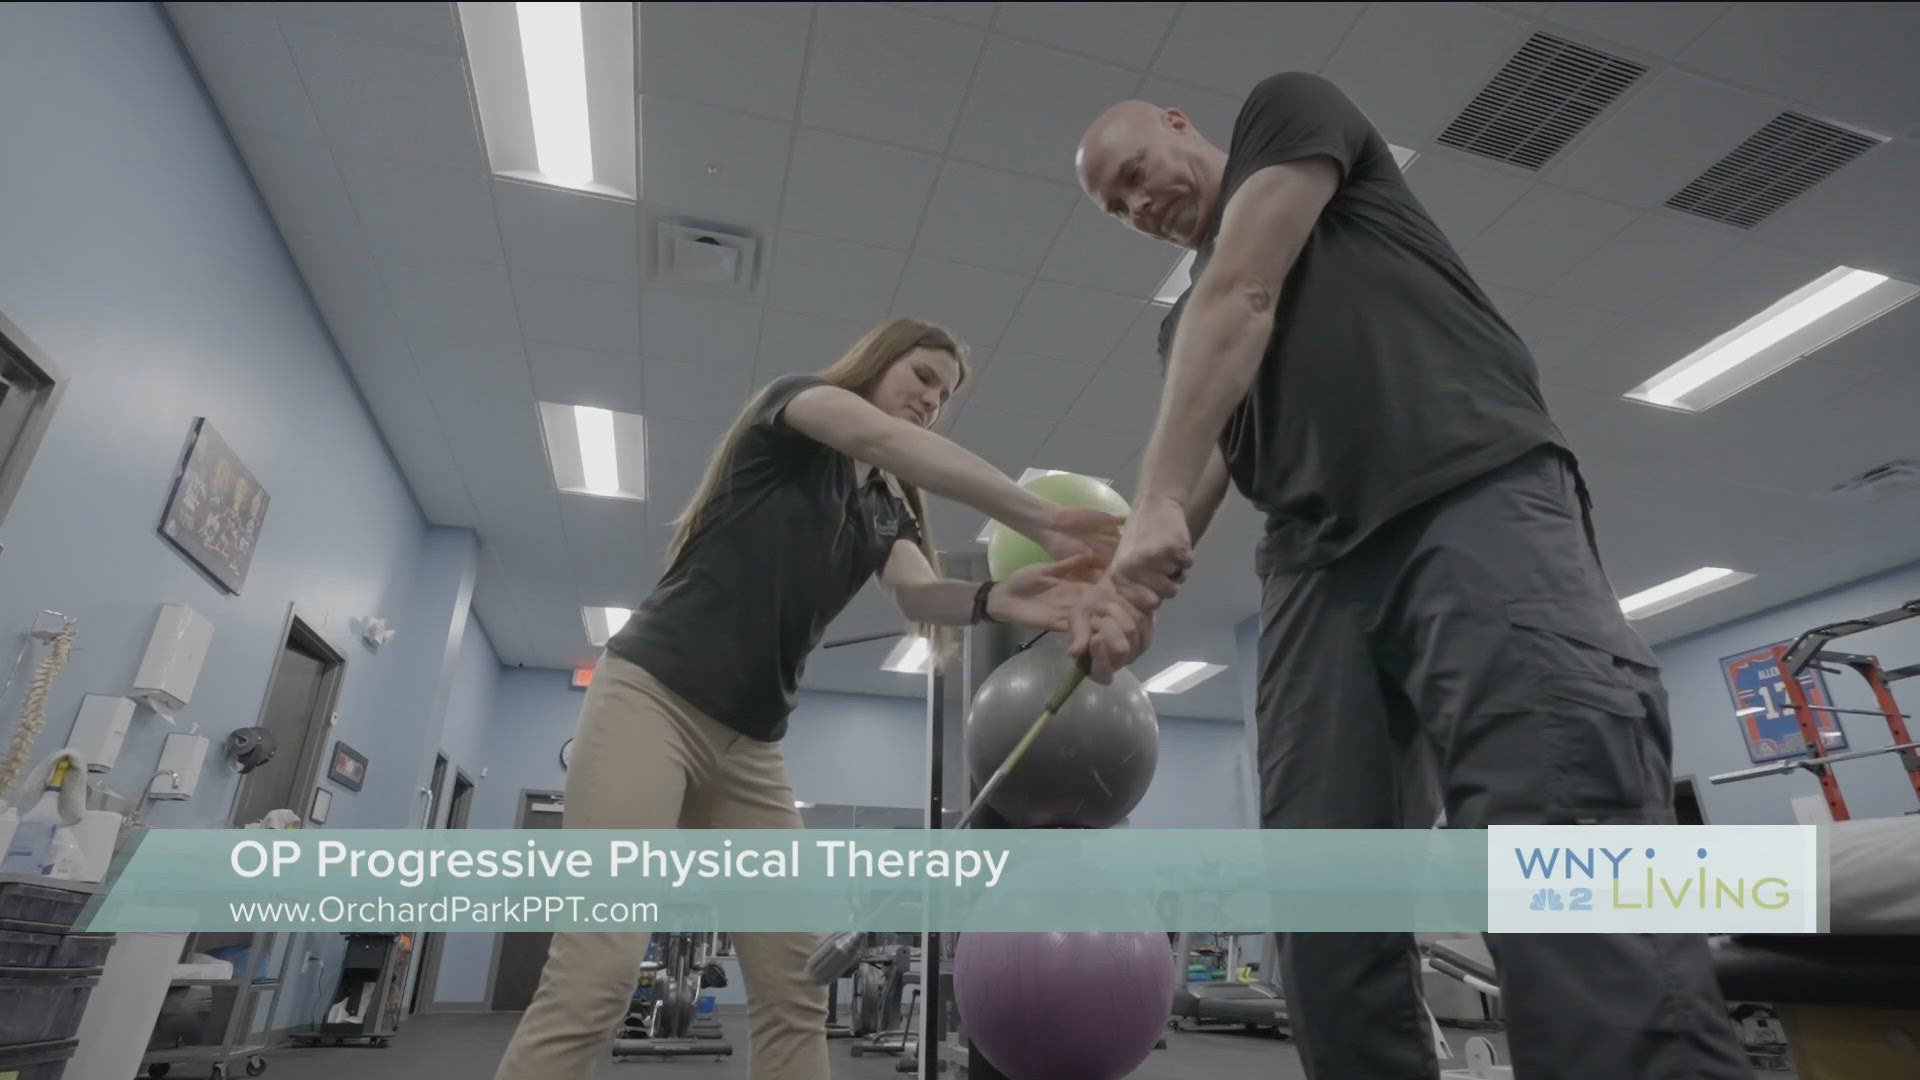 WNY Living - May 4th- OP Progressive Physical Therapy (THIS VIDEO IS SPONSORED BY OP PROGRESSIVE PHYSICAL THERAPY)